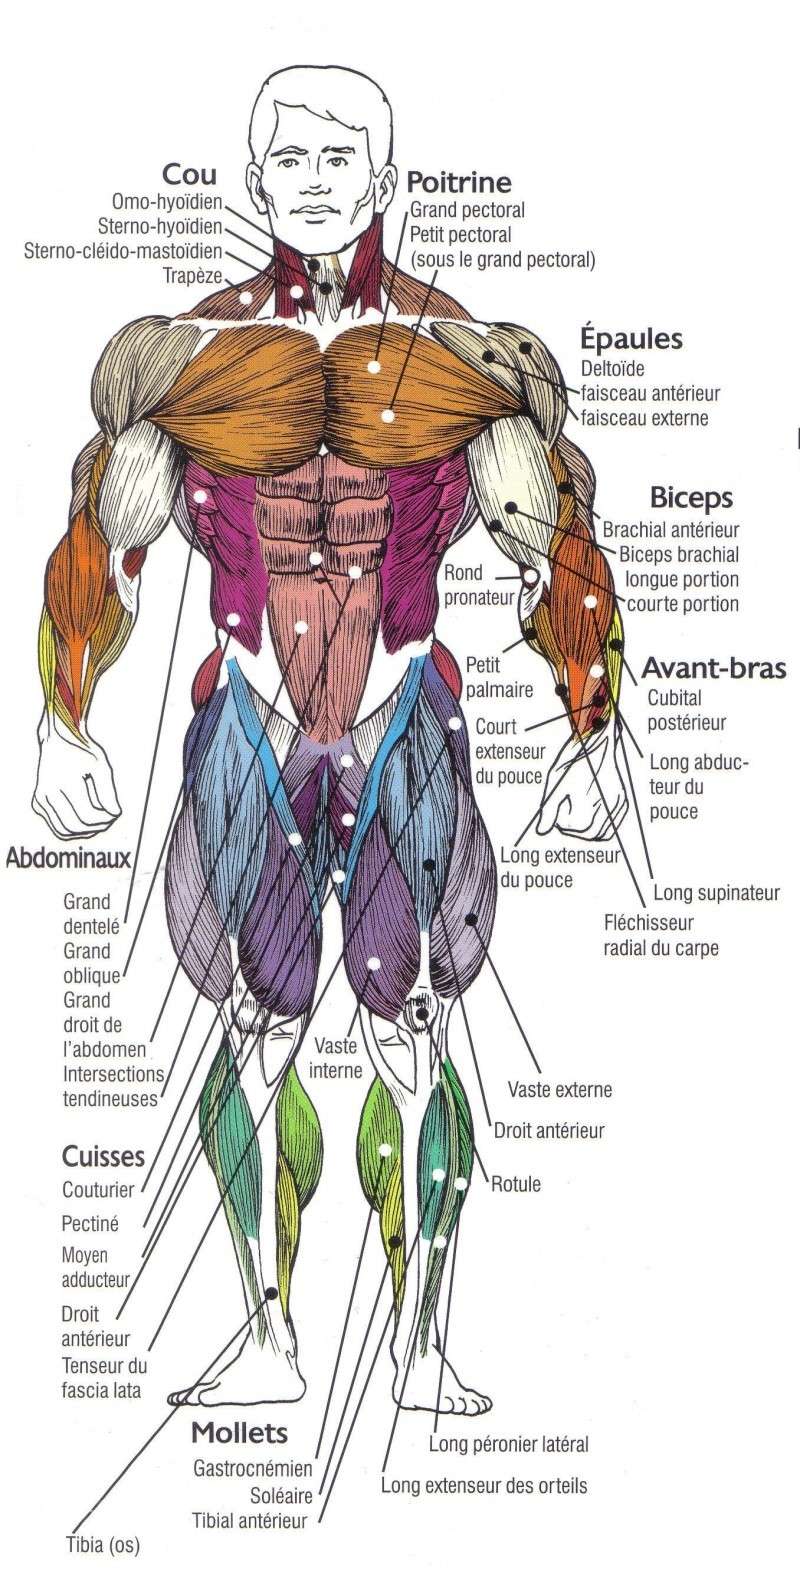 Anatomie Squelette Et Muscles Du Corps Humain Anatomy Study Body The